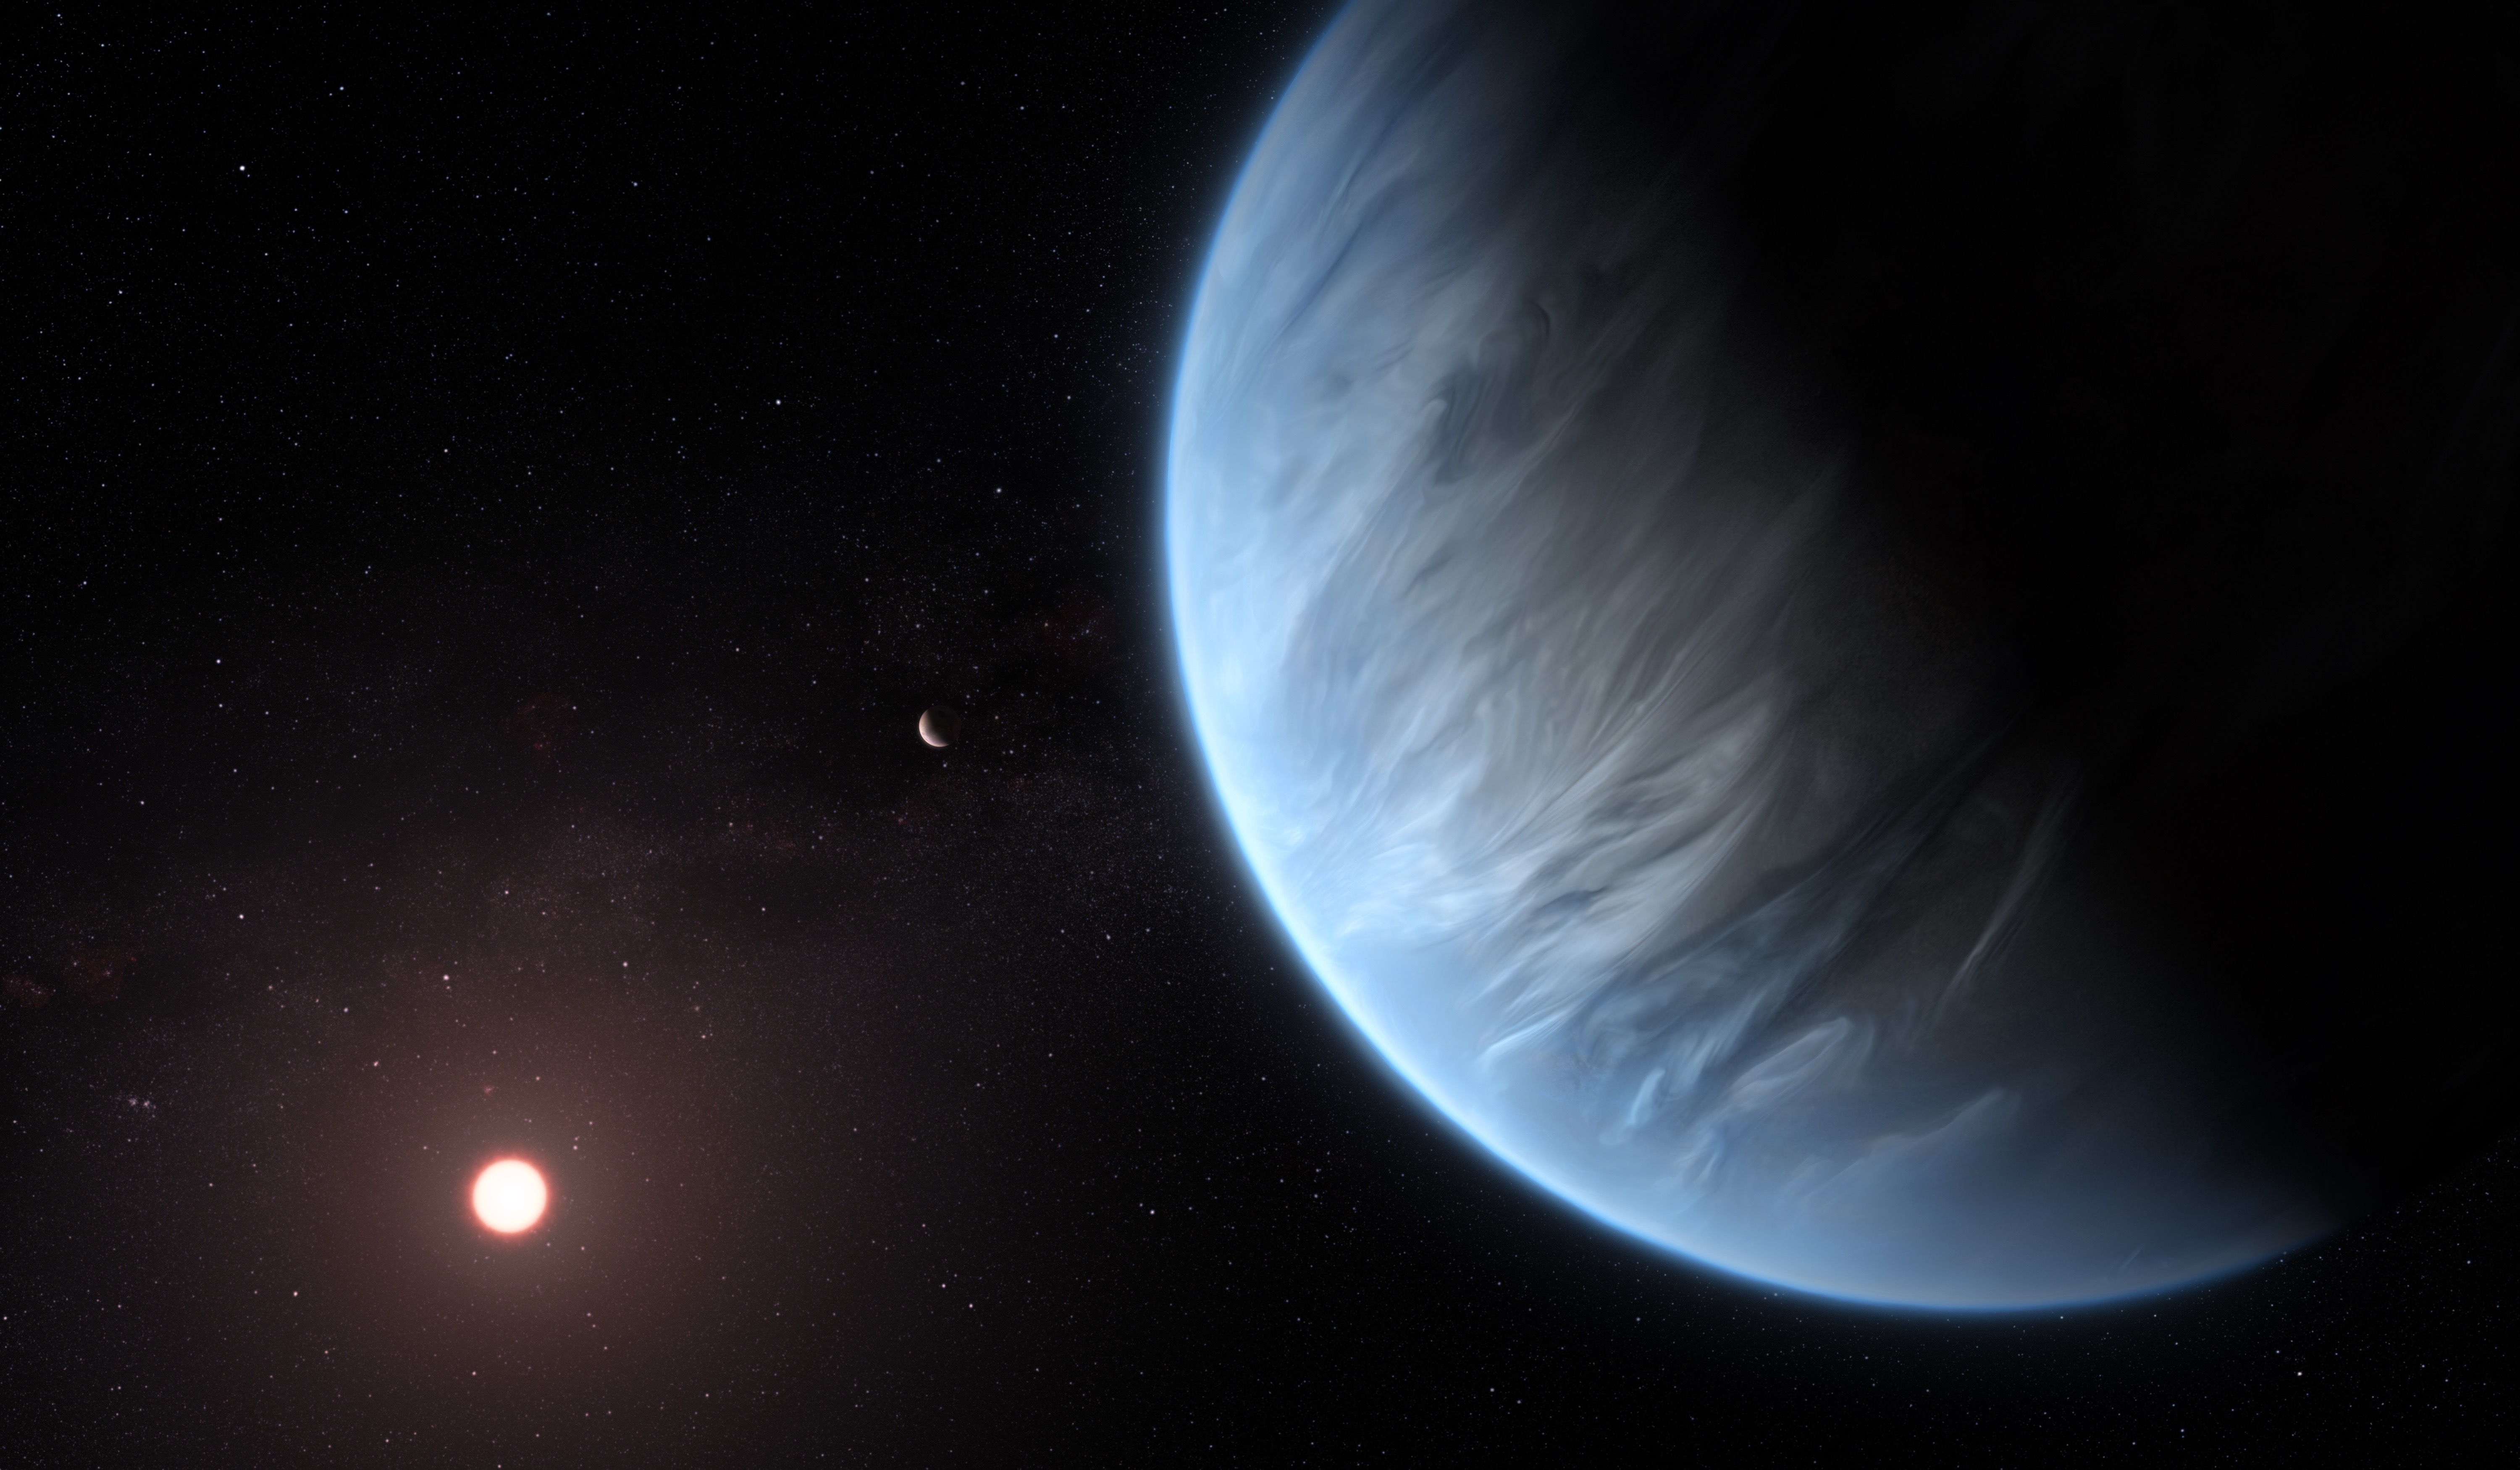 This artist’s illustration shows the planet K2-18 b, its host star and an accompanying planet in this system. K2-18 b is now the only super-Earth exoplanet known to host both water and temperatures that could support life.